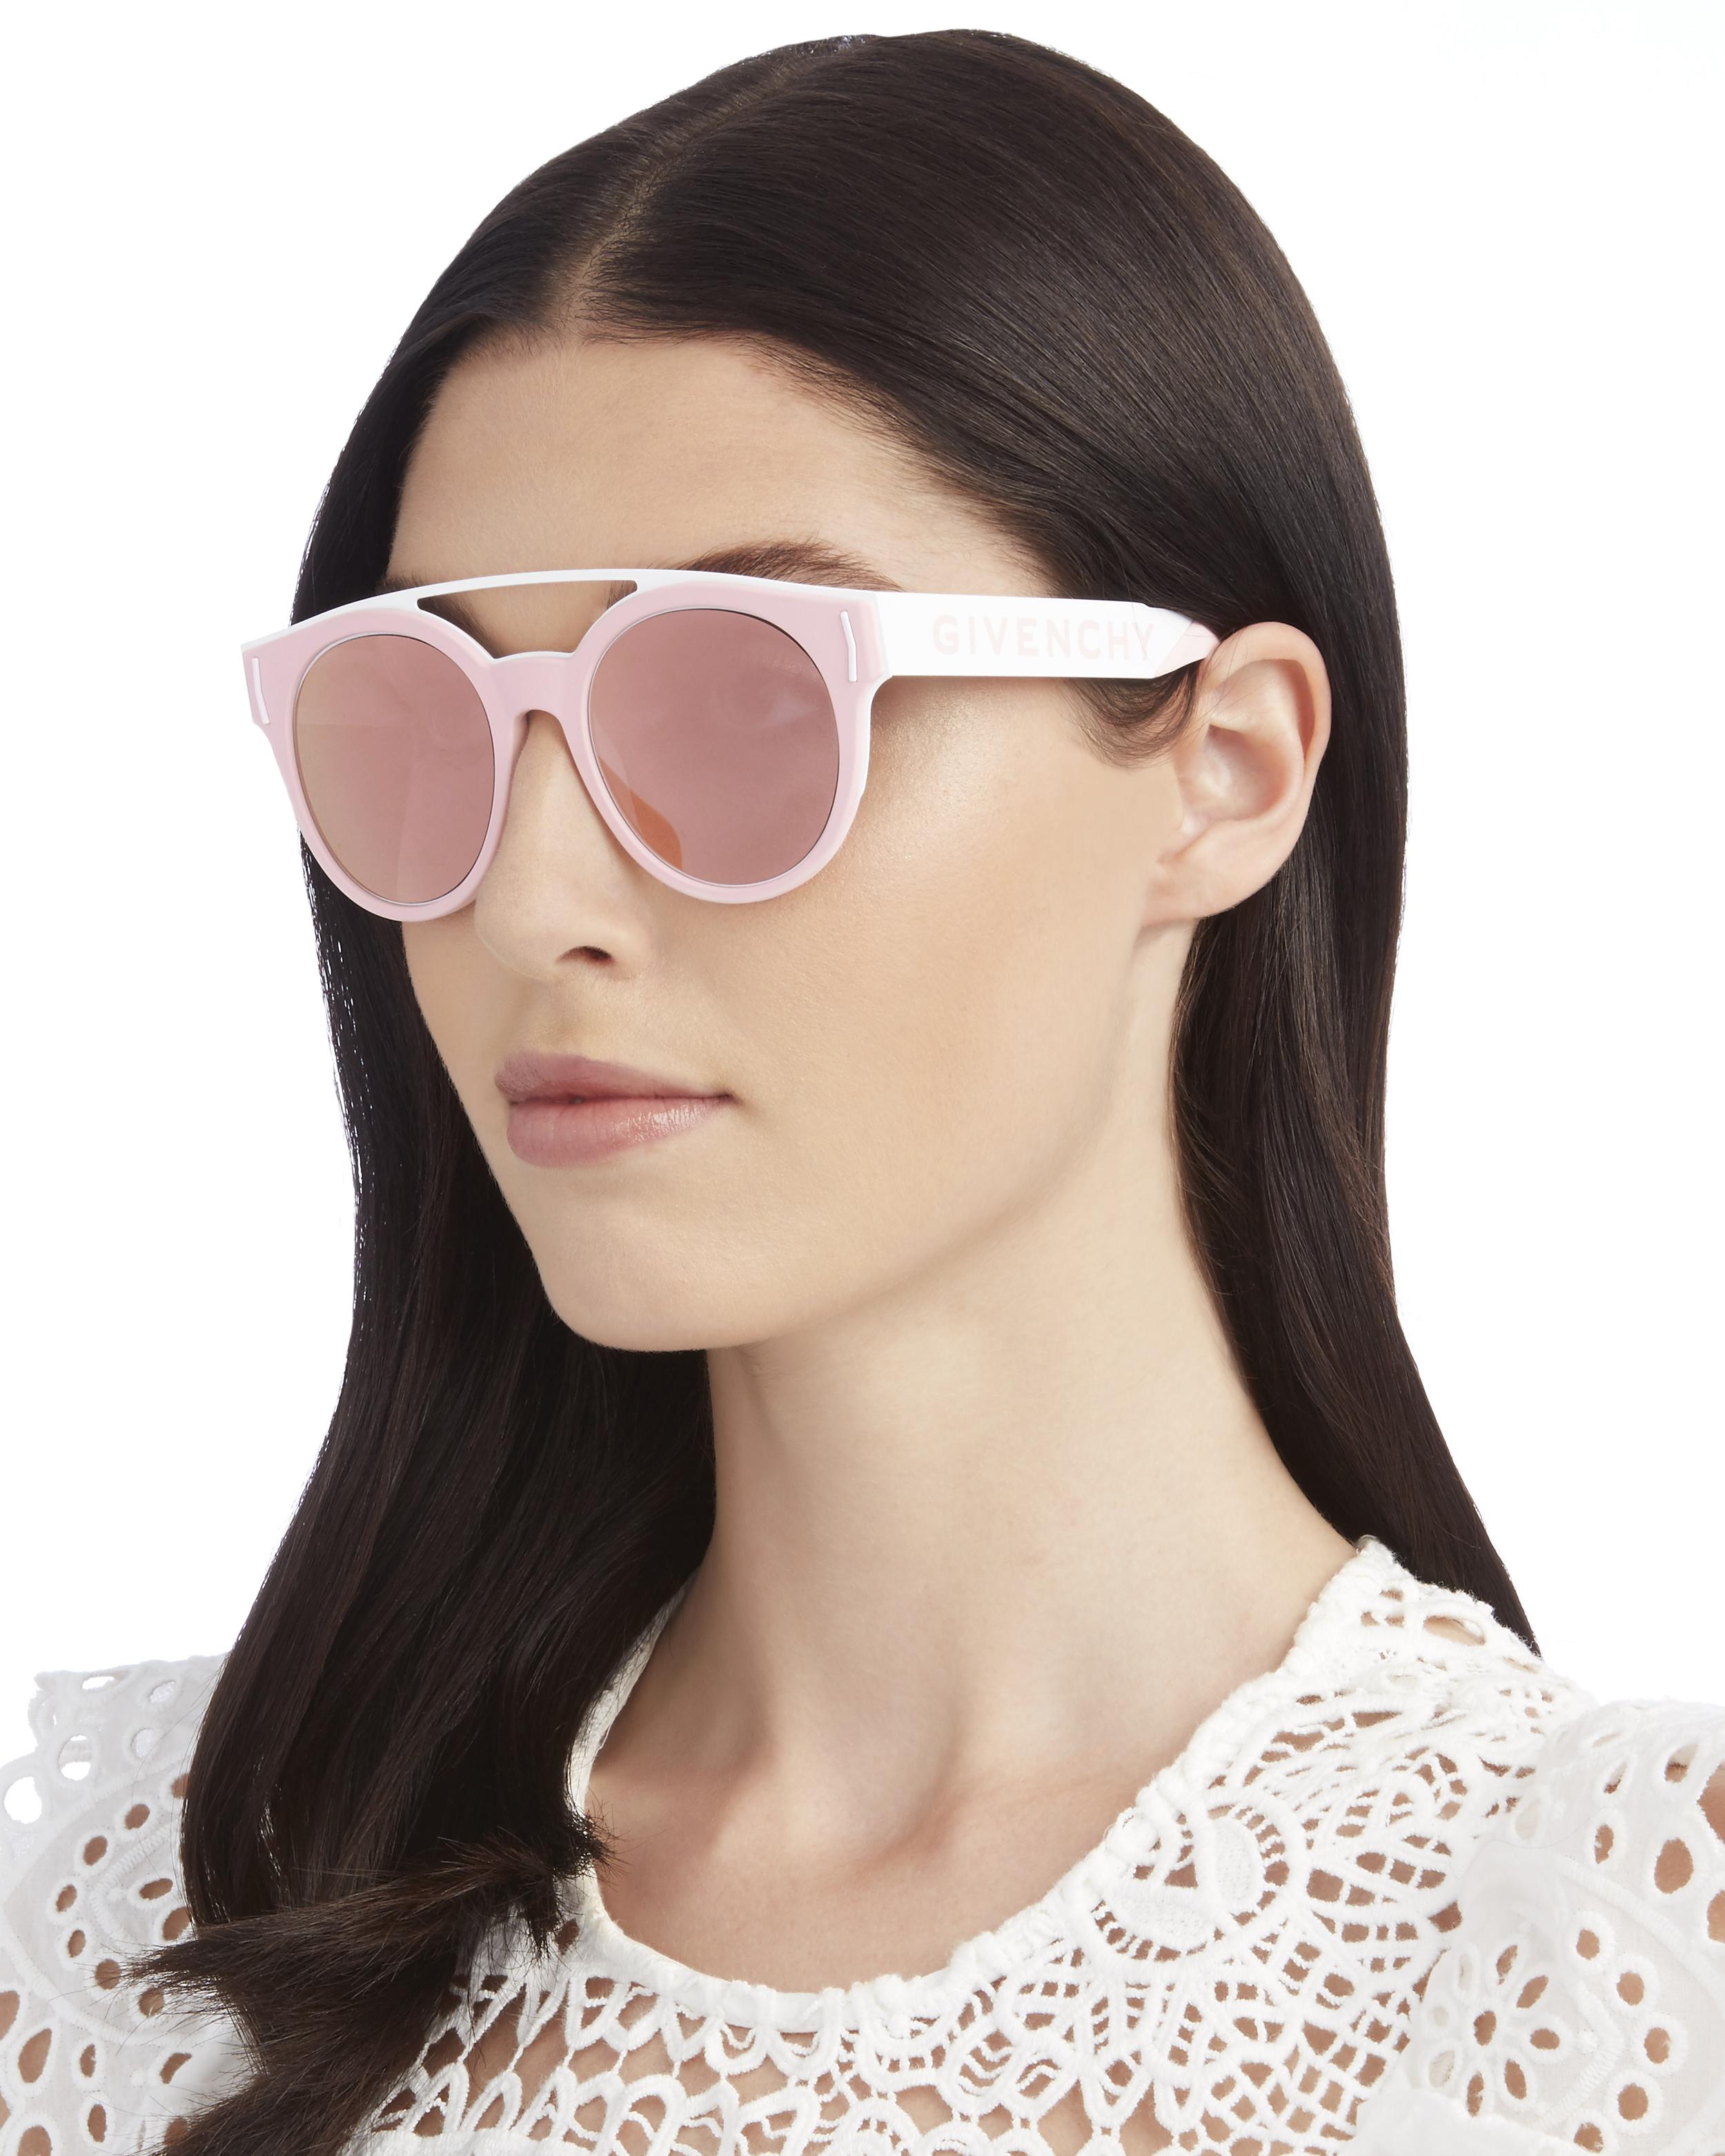 givenchy pink sunglasses